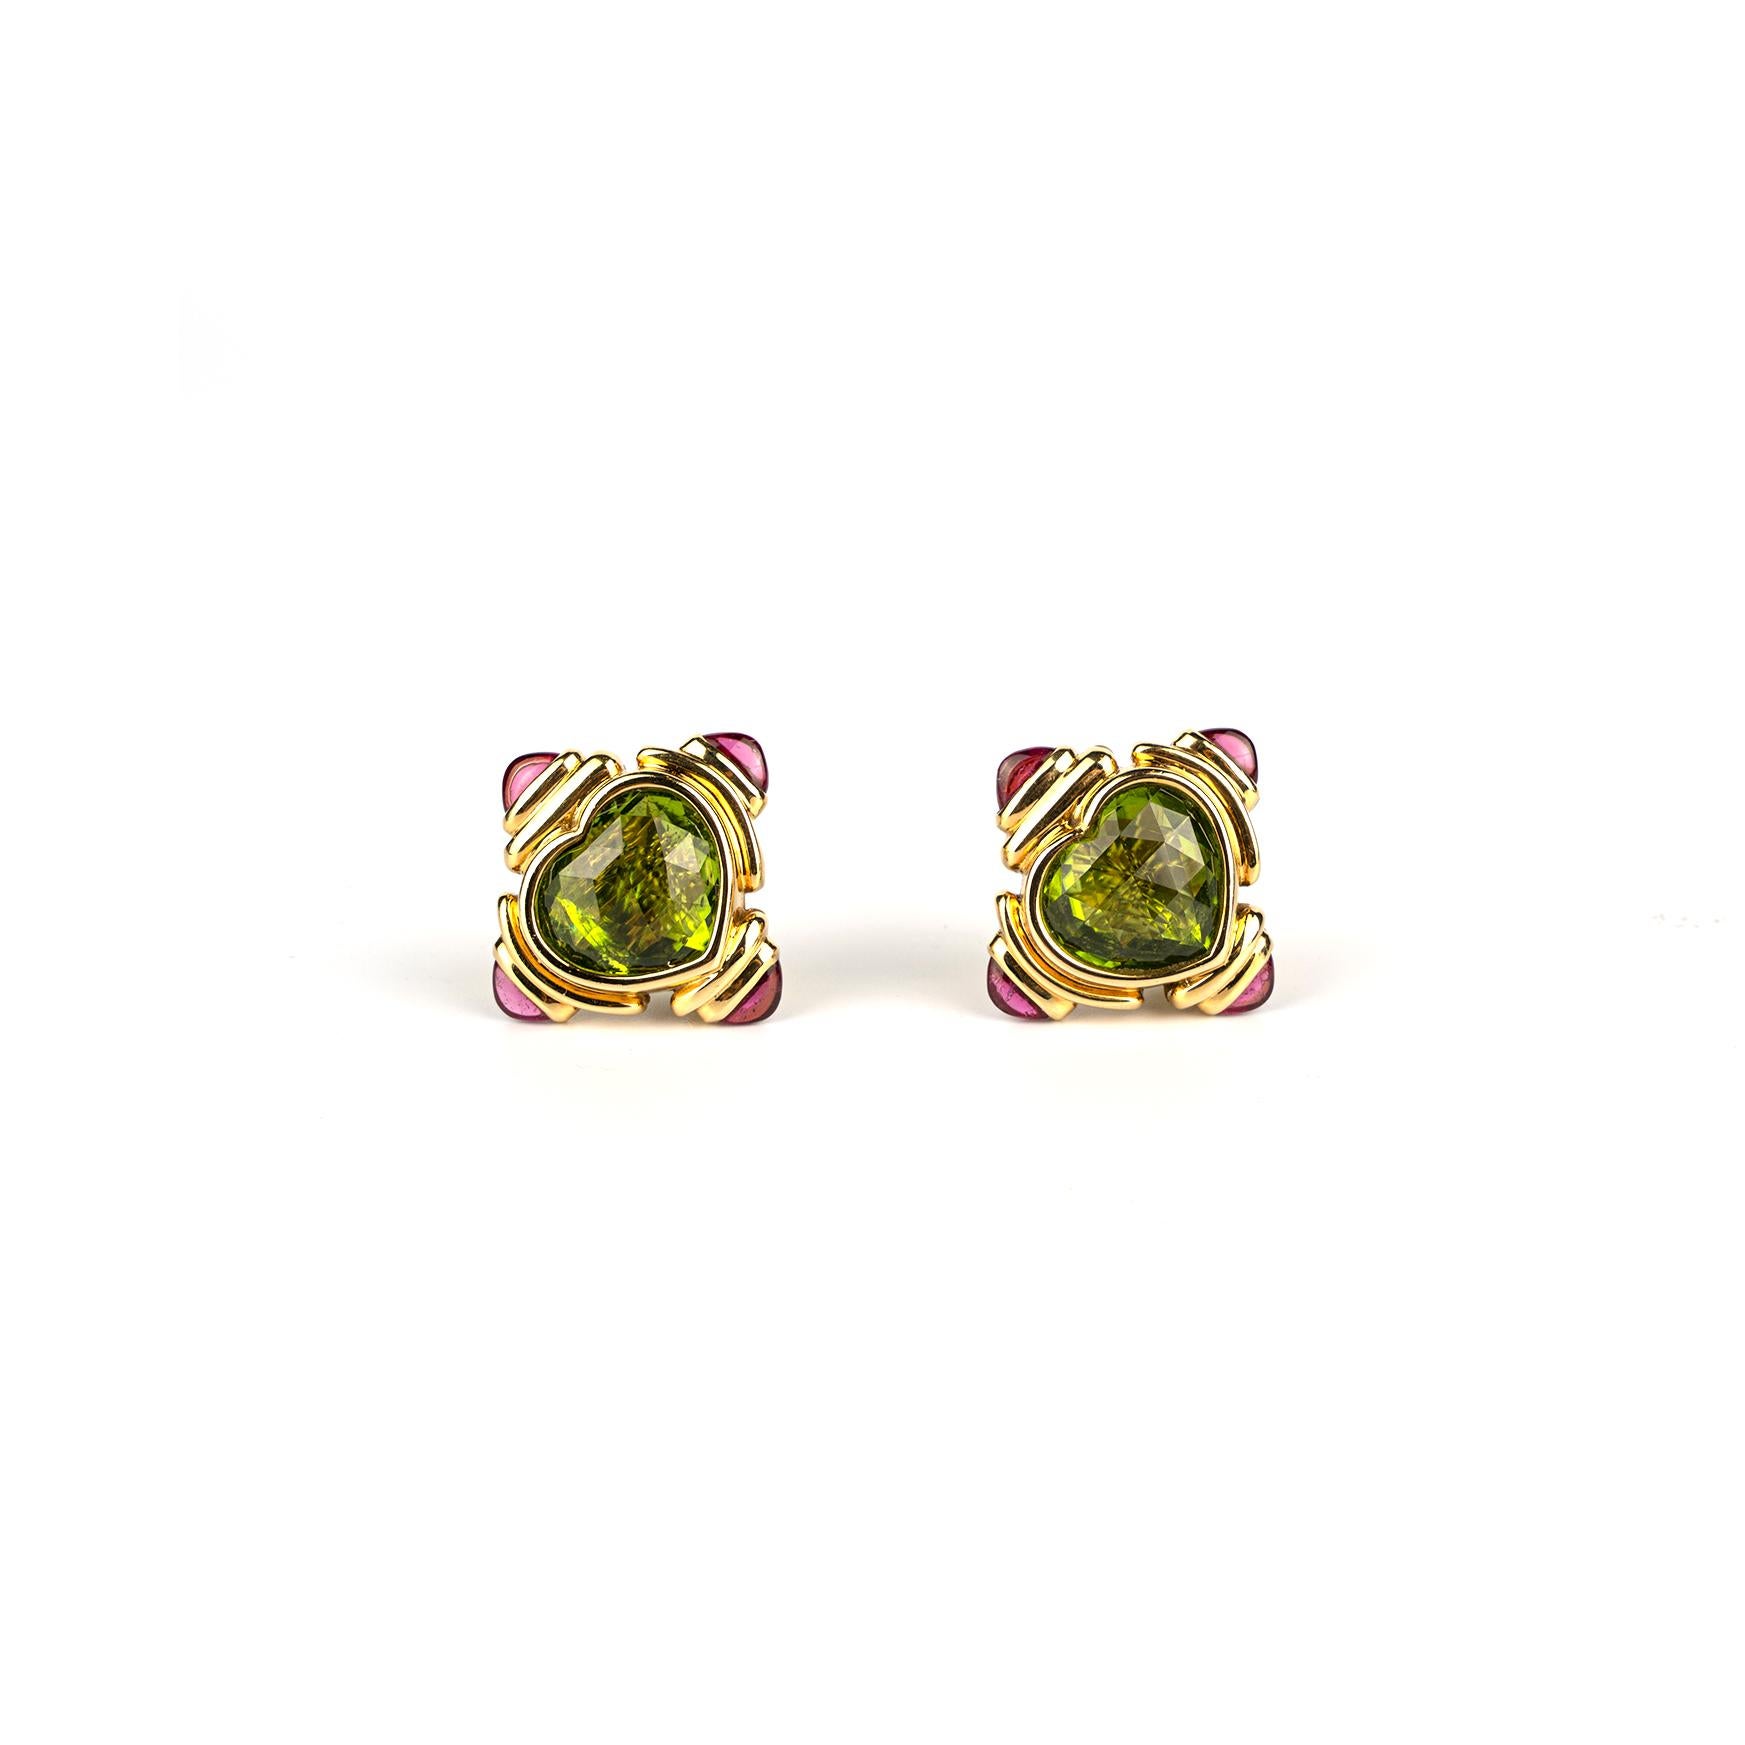 An elegant pair of vintage Bulgari 18k yellow gold earrings showcasing heart shaped peridots and cabochon pink tourmalines.  Made in Italy, circa 1980.